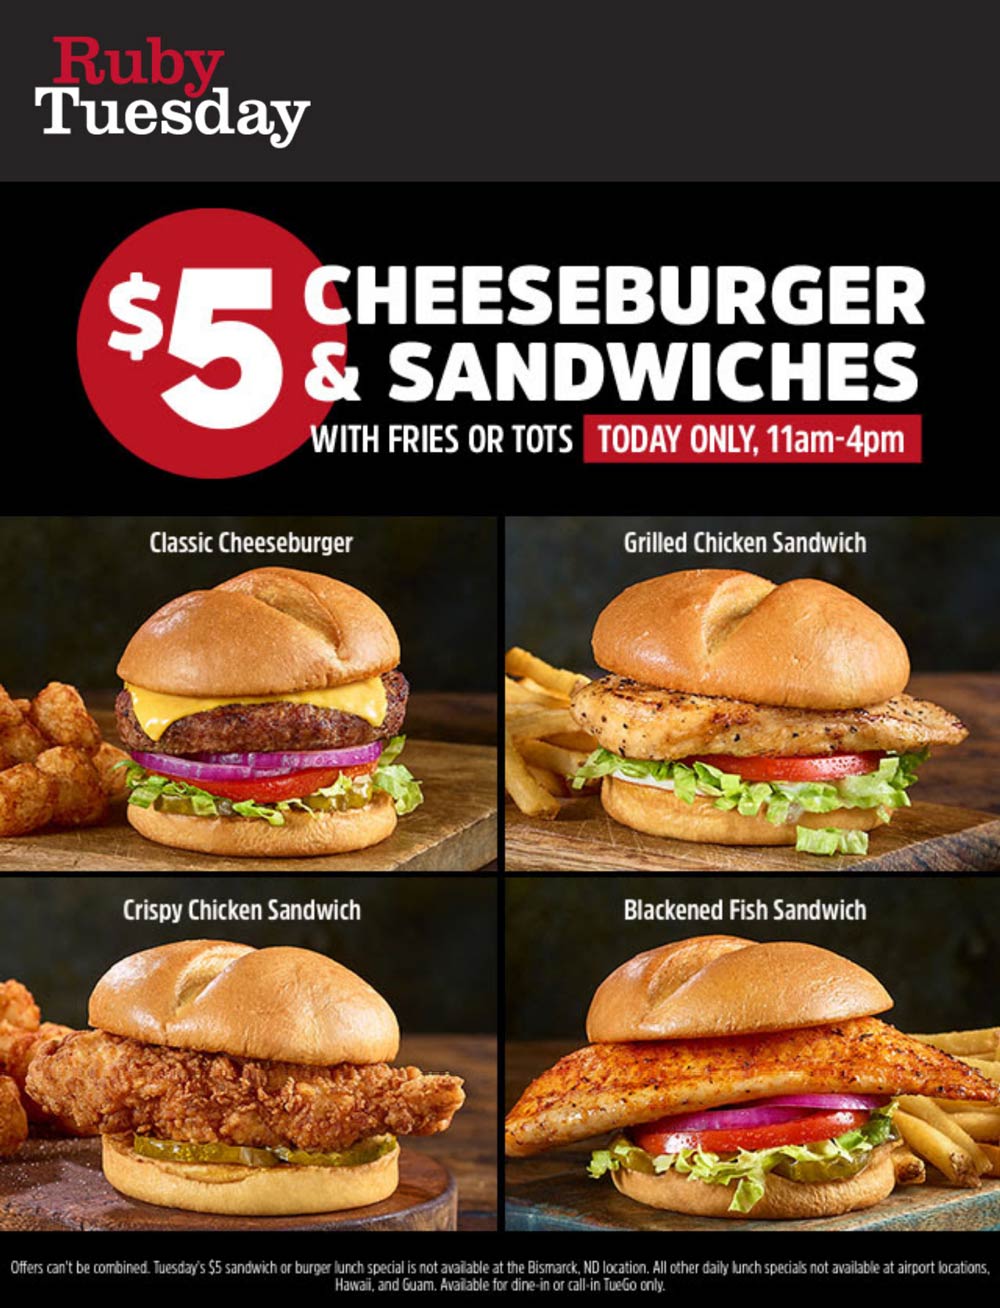 Ruby Tuesday restaurants Coupon  Cheeseburger or sandwich + fries = $5 today at Ruby Tuesday #rubytuesday 